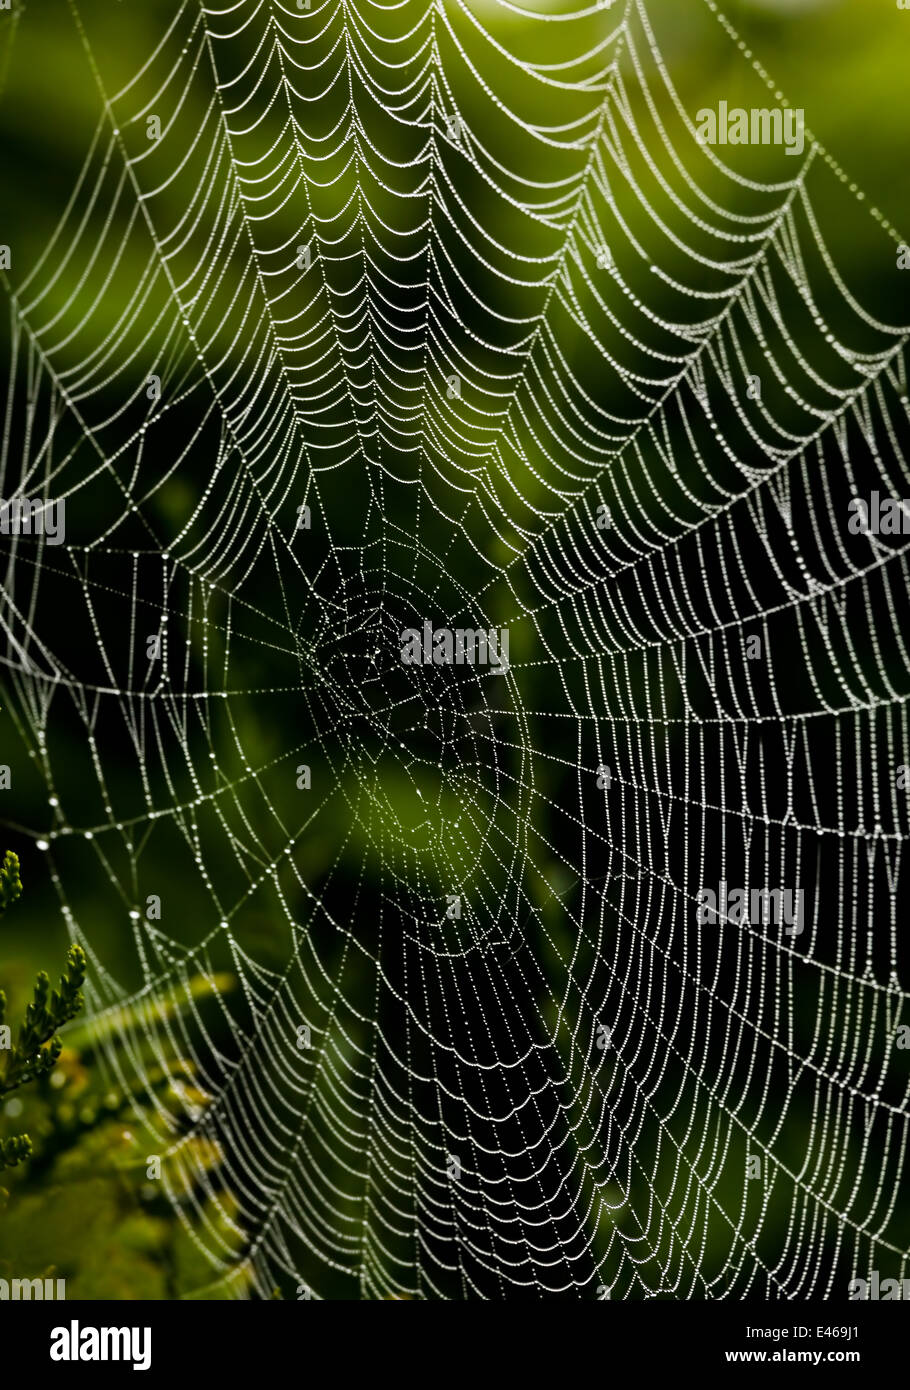 The web of a spider in the morning dew. Photo icon for network and networking. Stock Photo